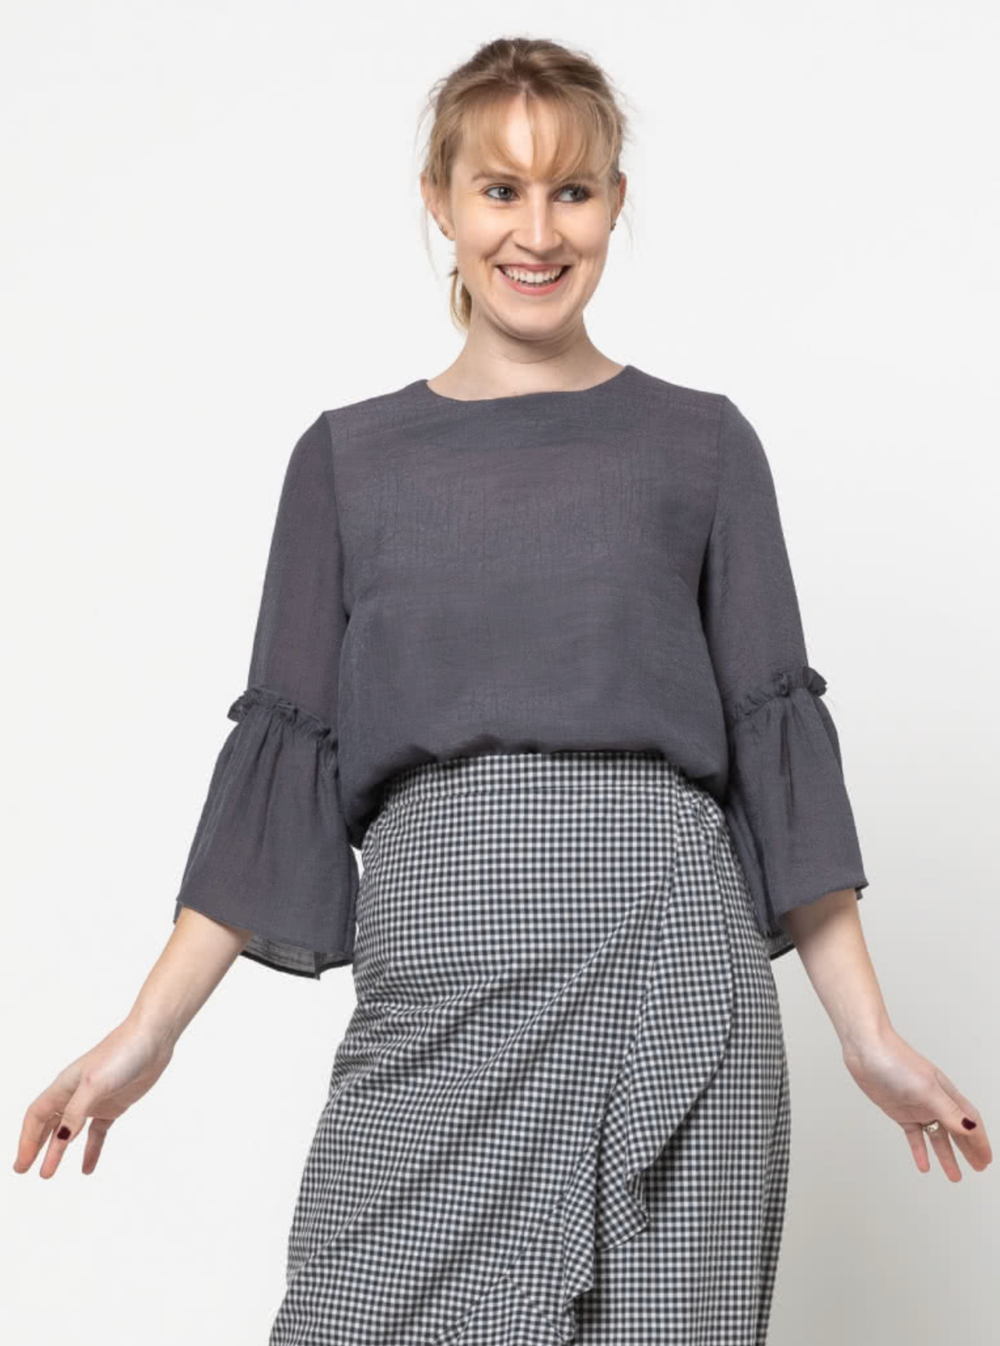 Women wearing the Effie Woven Top sewing pattern from Style Arc on The Fold Line. A top pattern made in rayon, silk or crepe fabrics, featuring a round neck, bust darts, 3/4 length sleeves with wide frill, back button-and-loop closure, and mid-hip length.